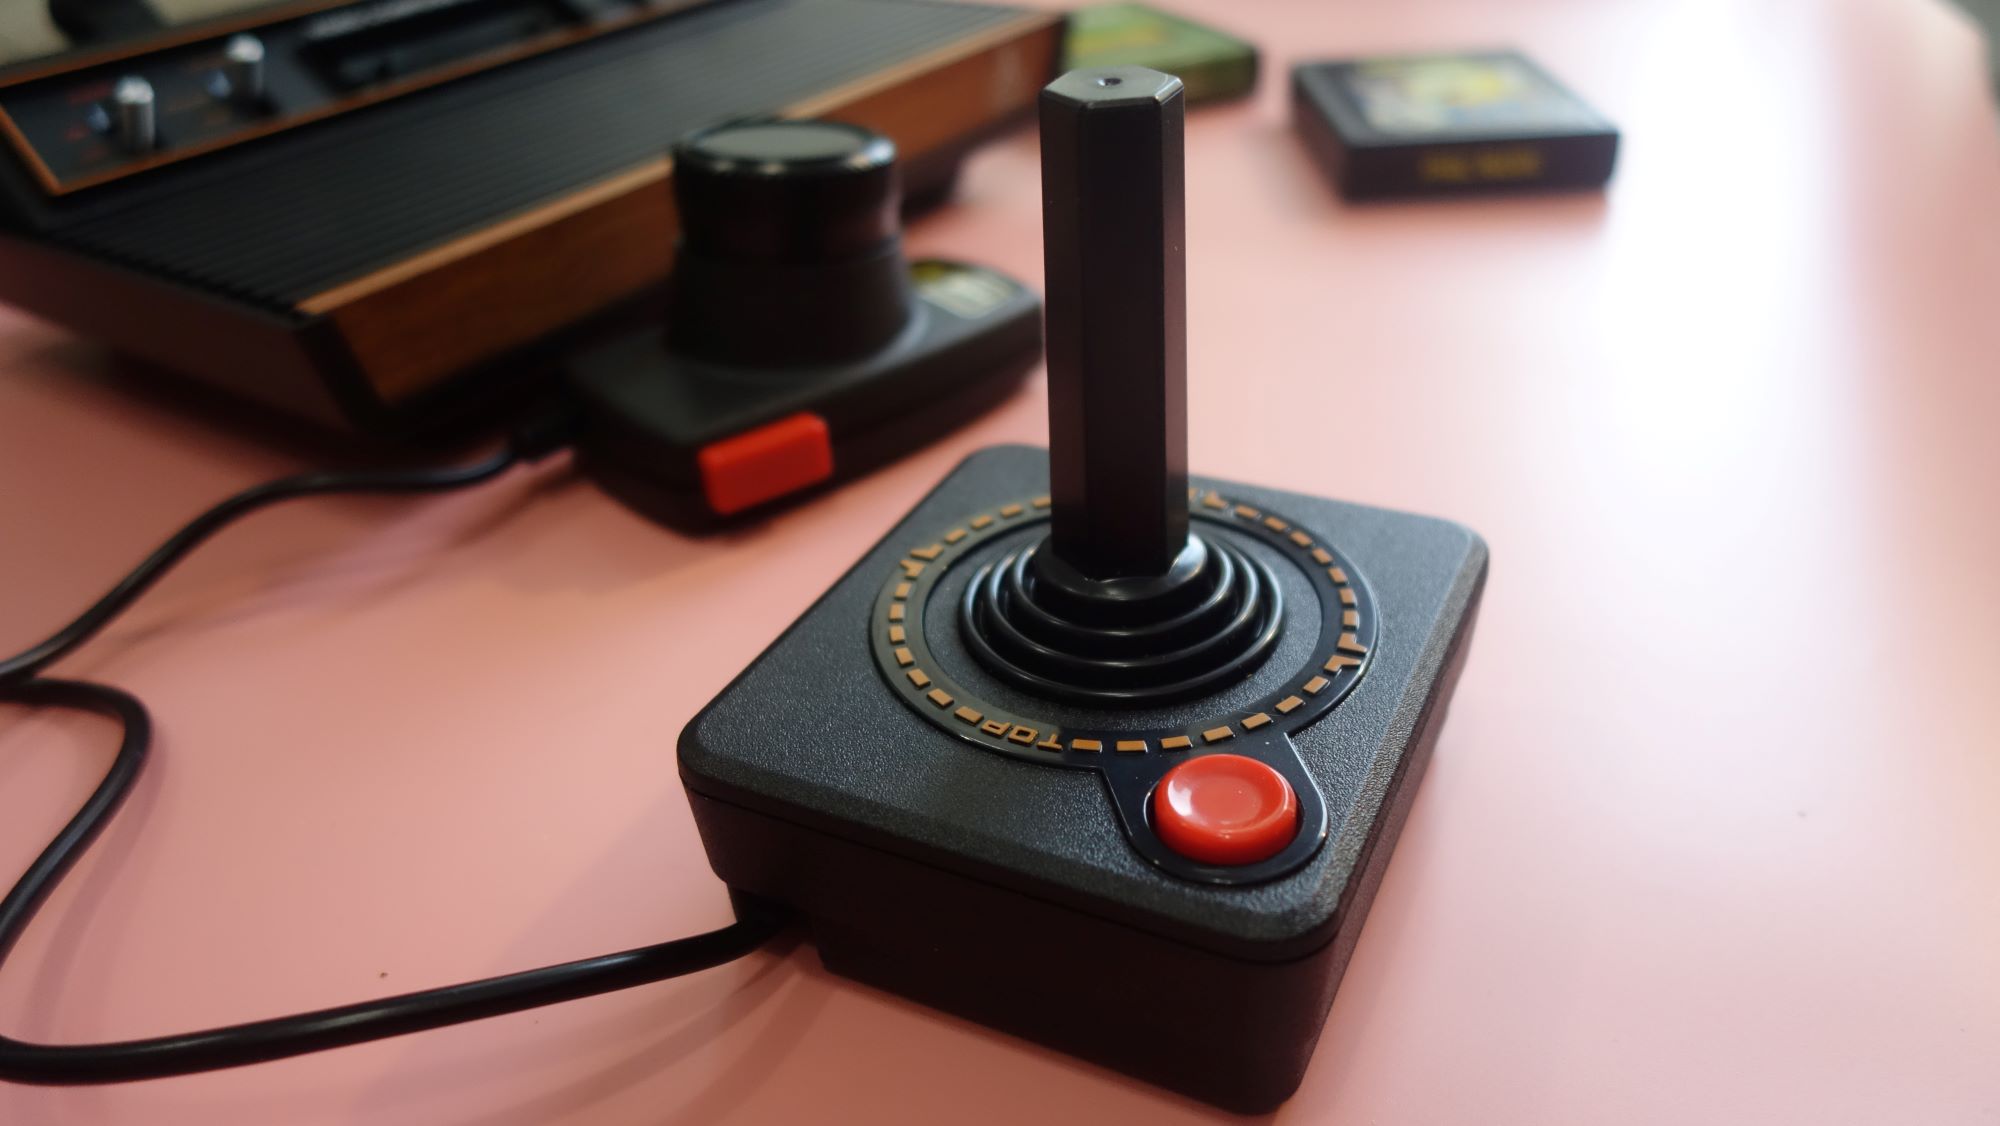 Atari 2600+ FULL REVIEW  Is the 2023 Console a Plus or a Minus? –  GenXGrownUp